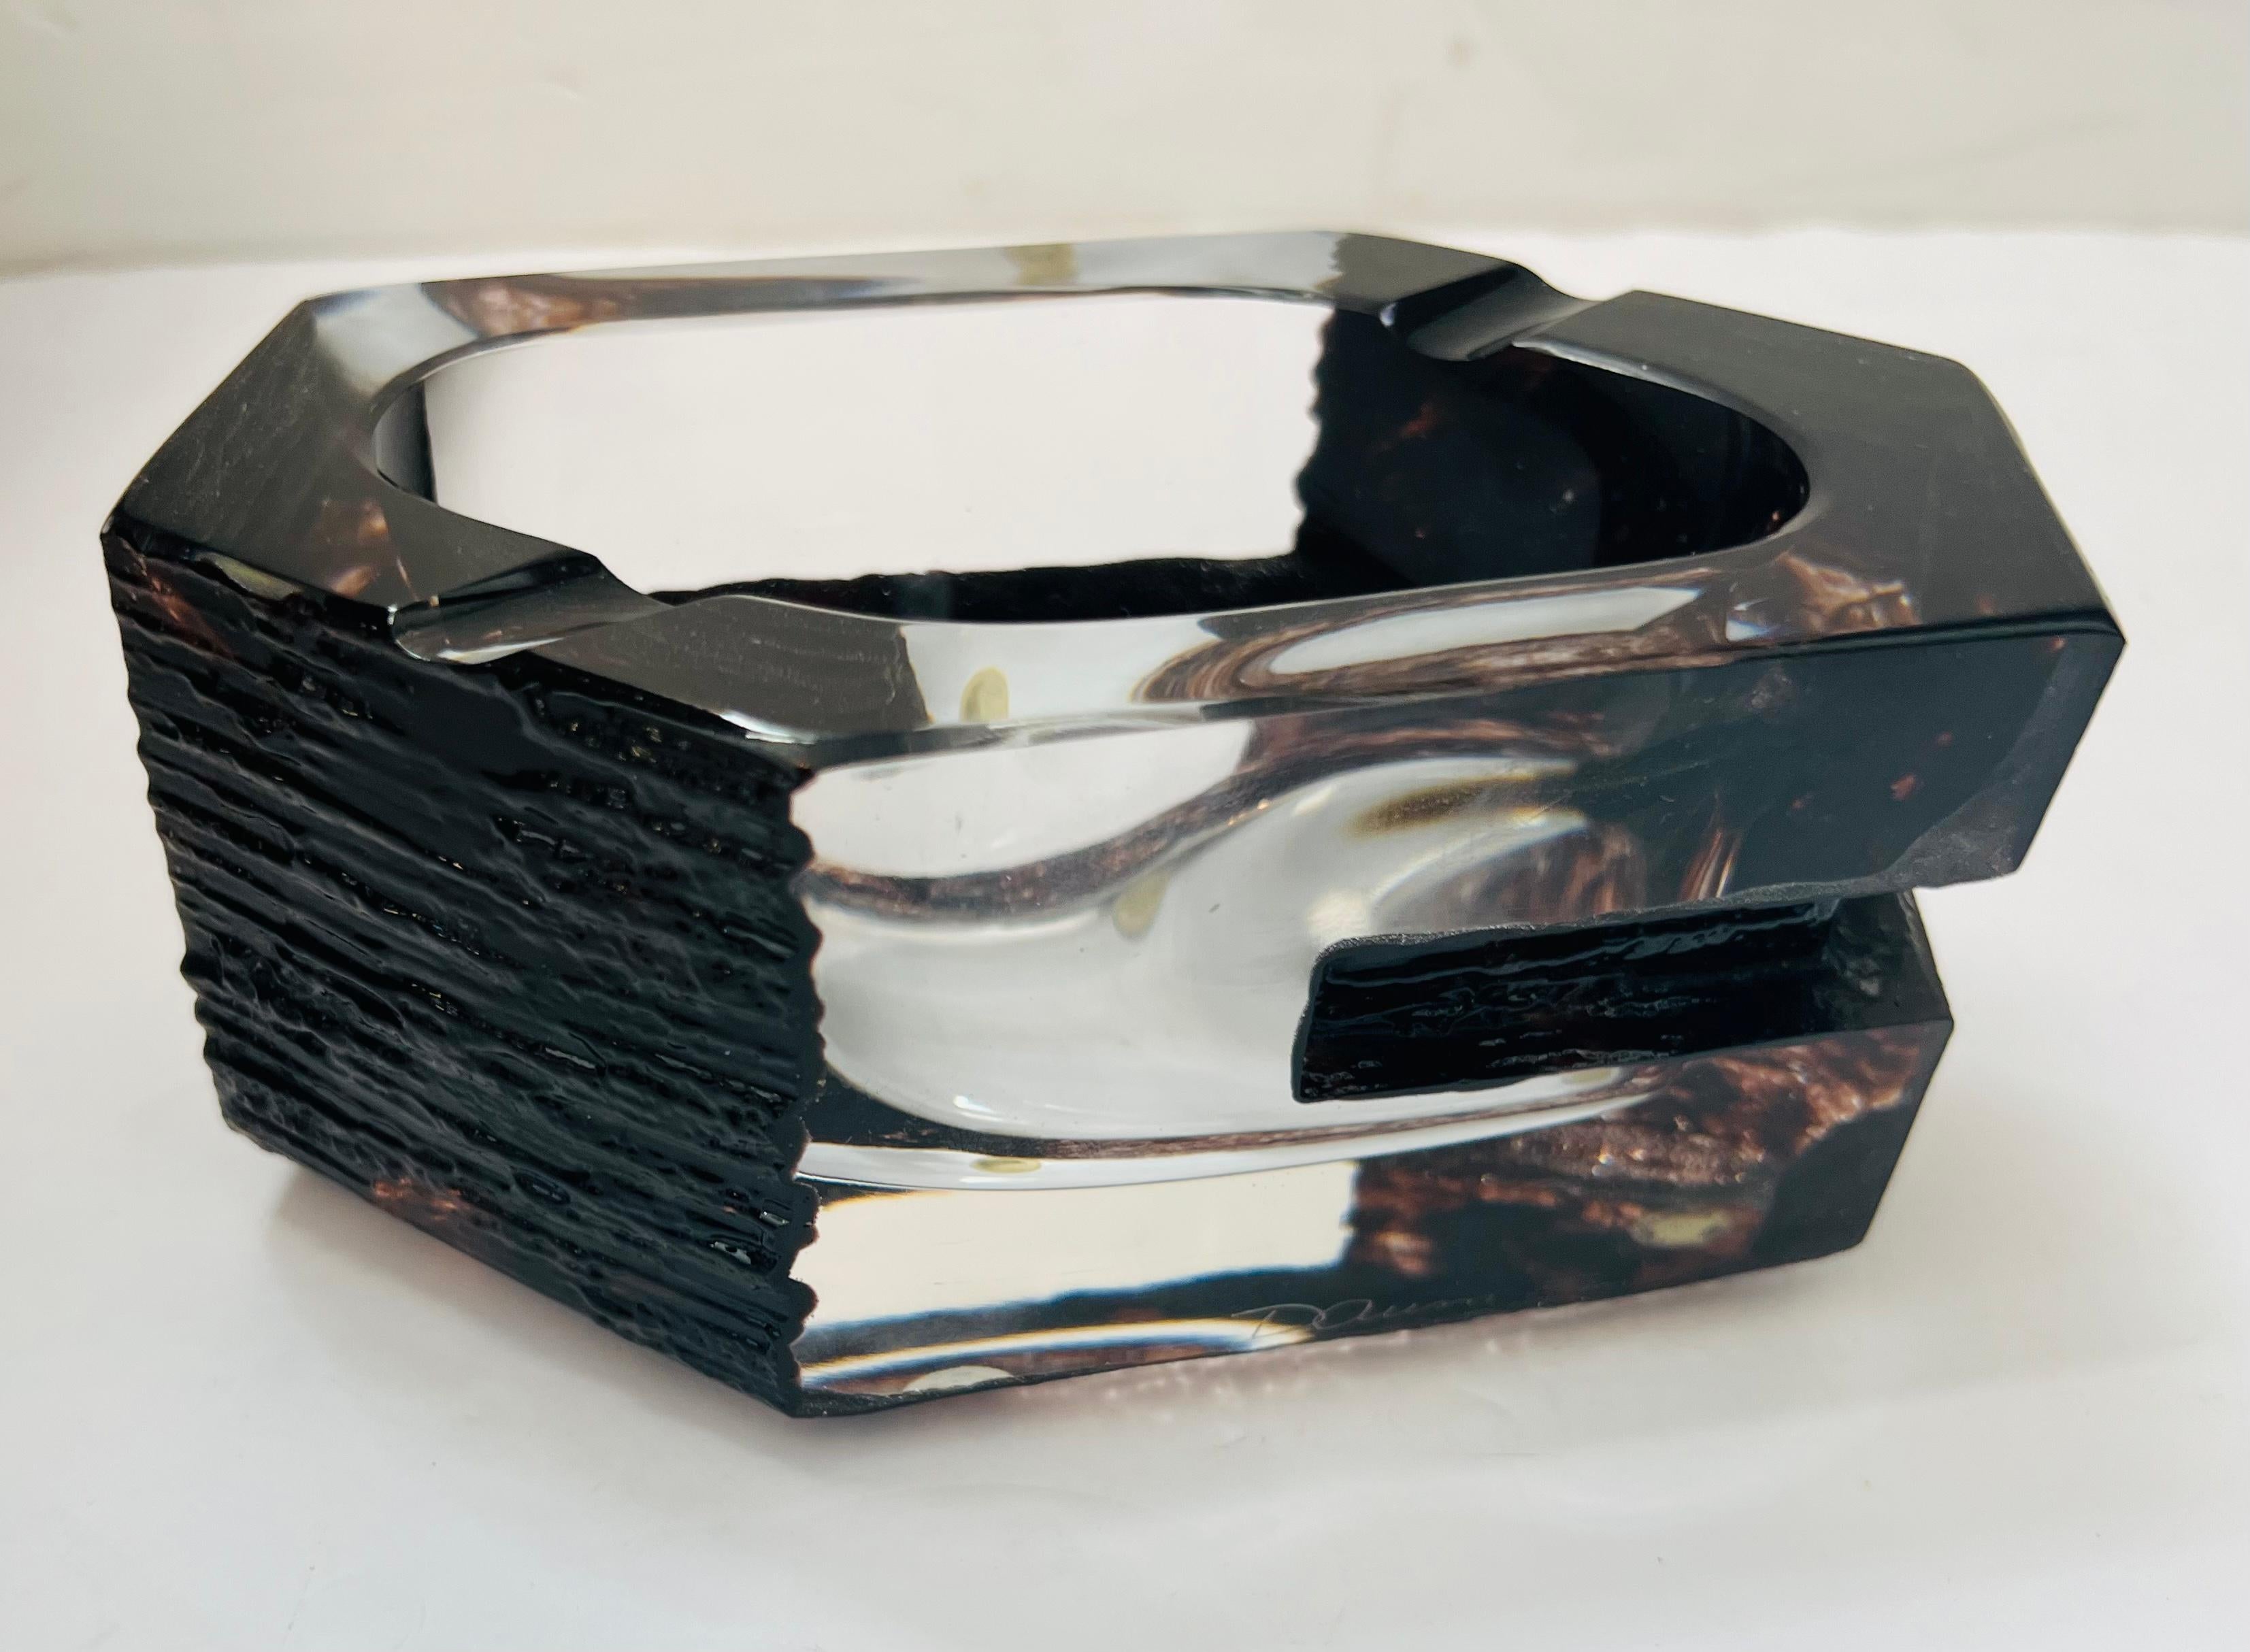 A great sculptural thick black and clear smoked crystal ashtray bowl in a brutalist style by the famed French artist Cesar Baldaccini for Daum. Signed. Excellent unused condition.